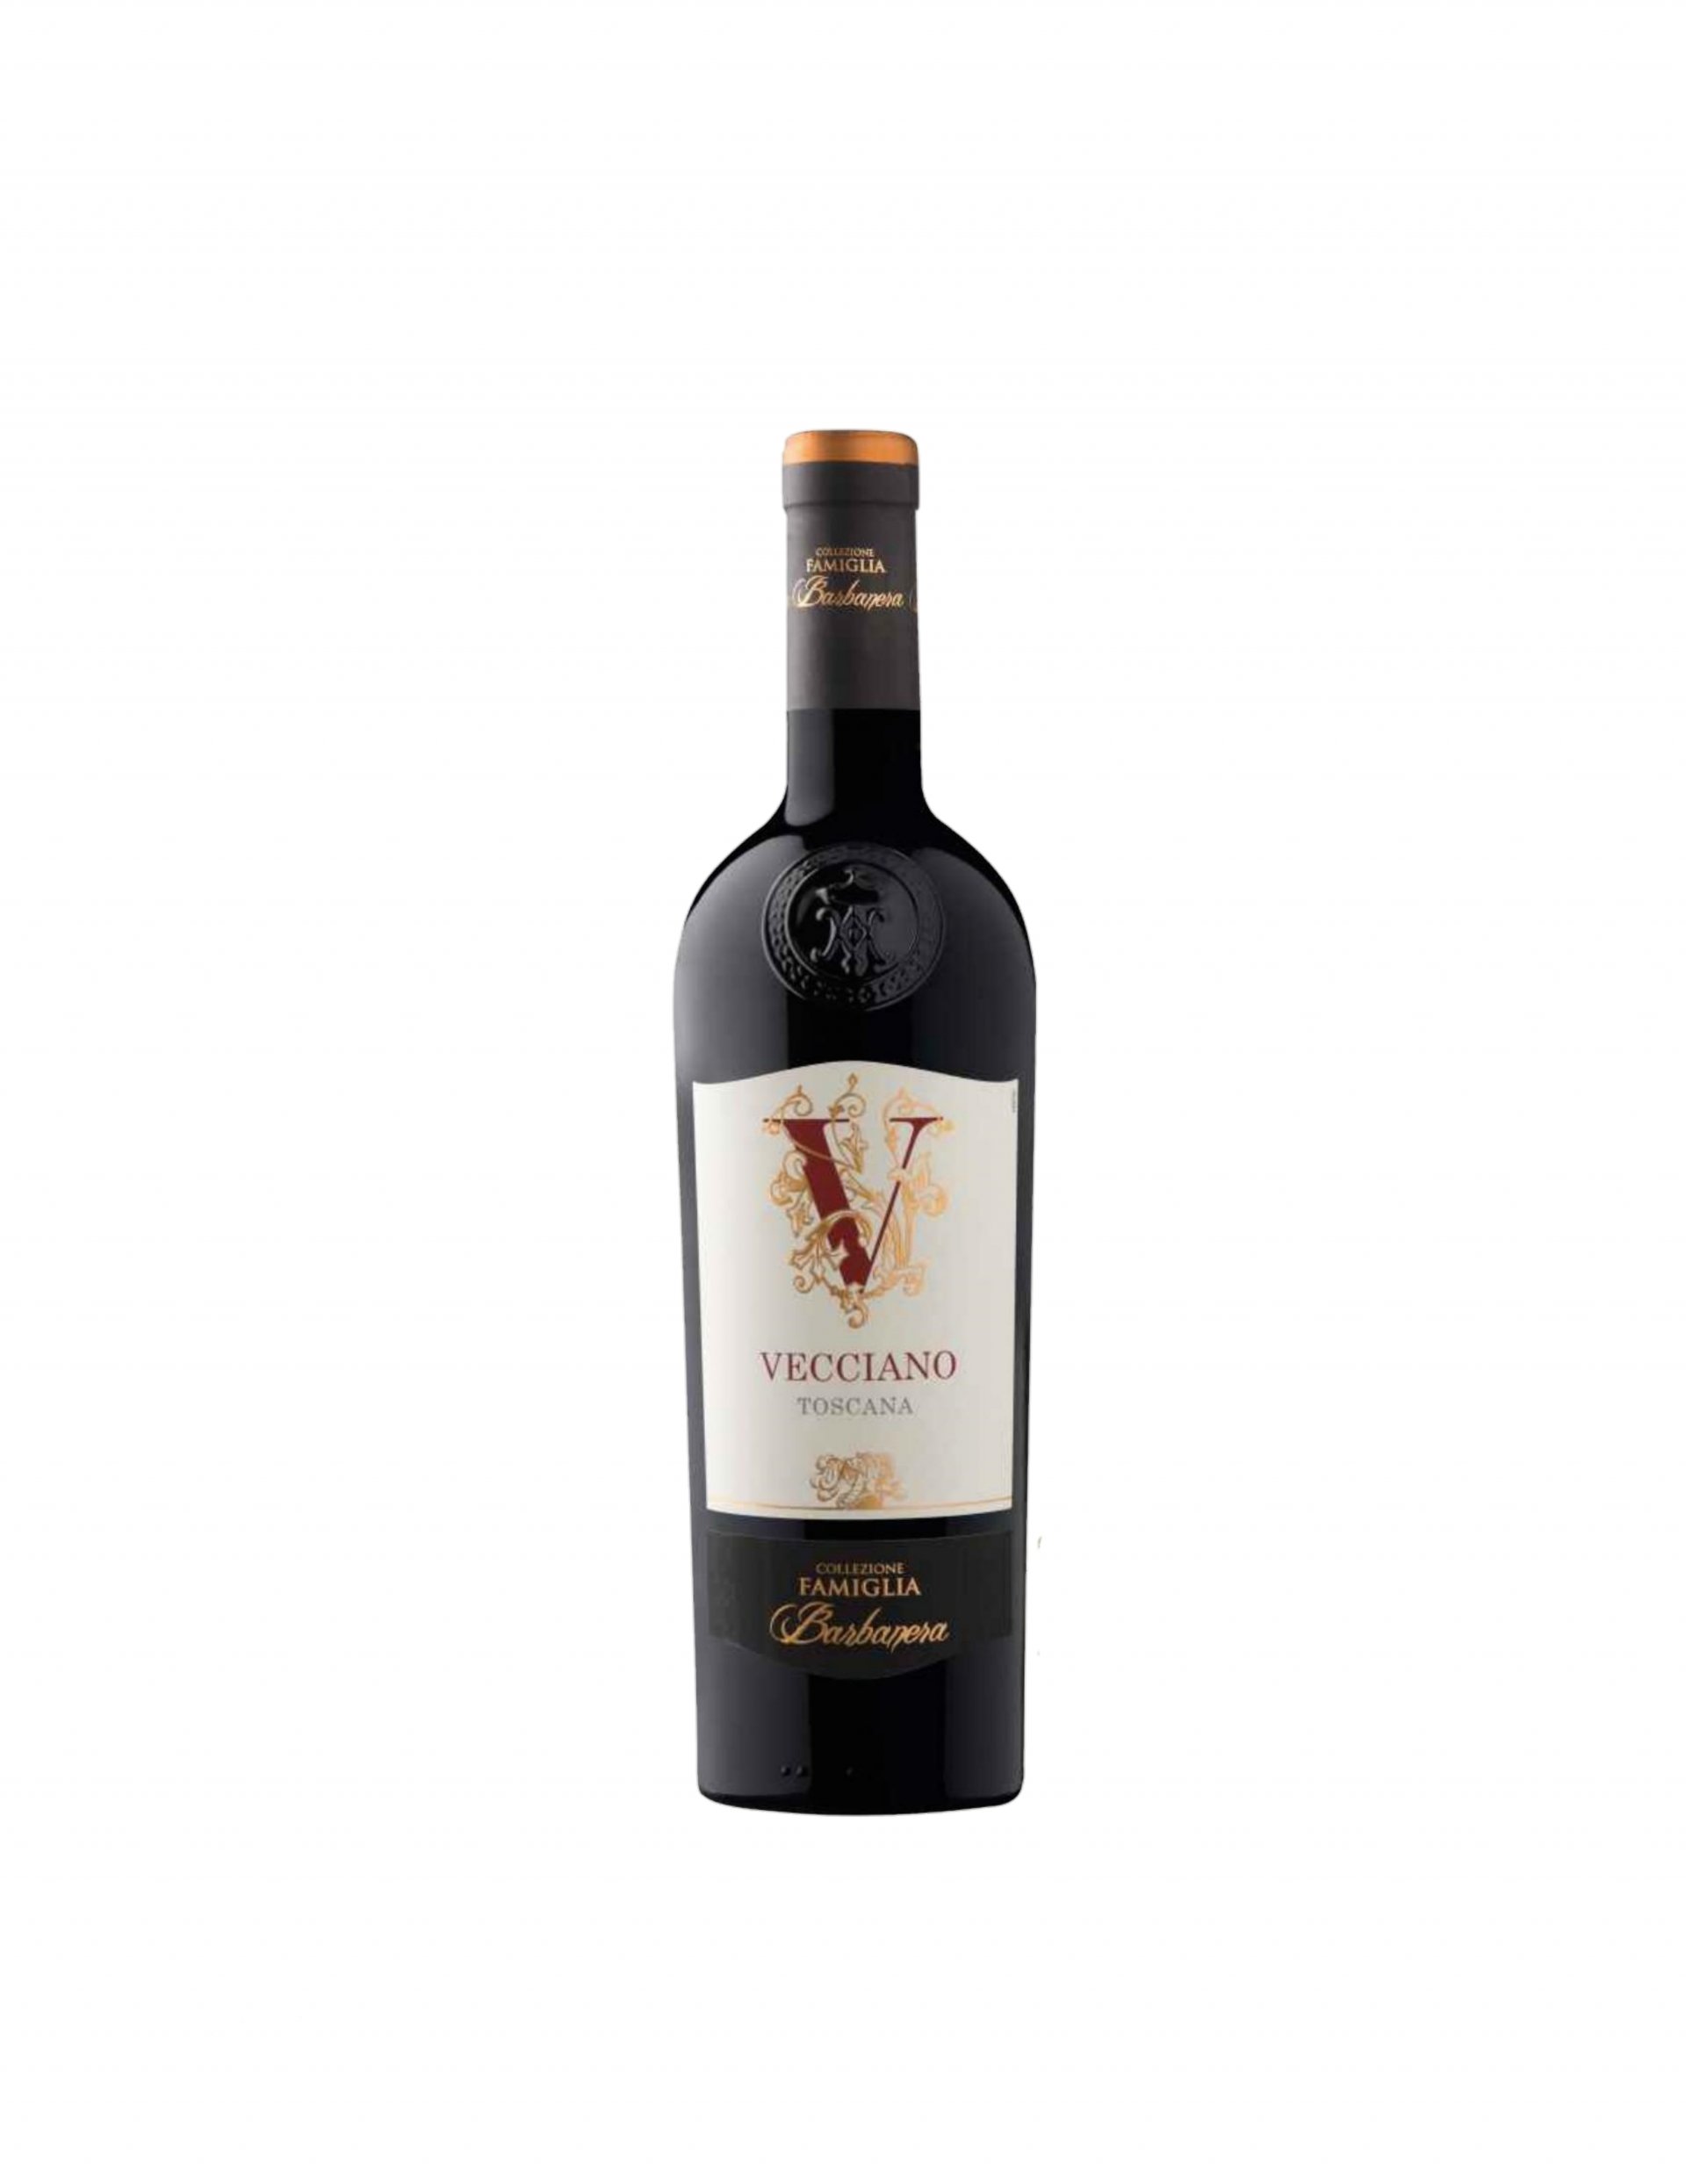 Vecciano Rosso IGT (SuperTuscan)